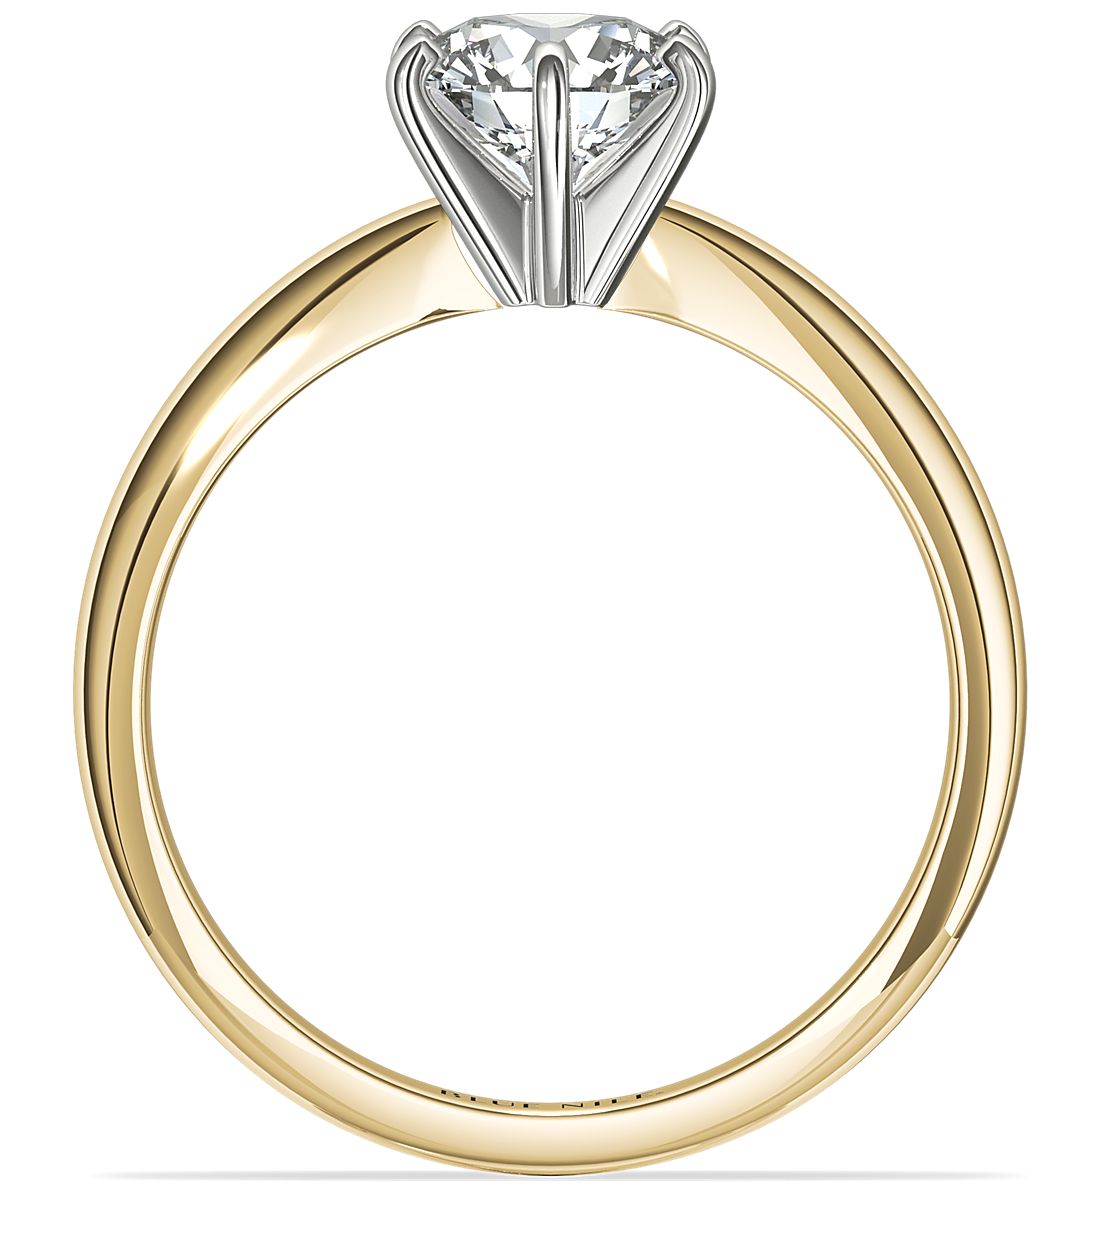 Classic Six-Prong Solitaire Engagement Ring in 18k Yellow Gold 